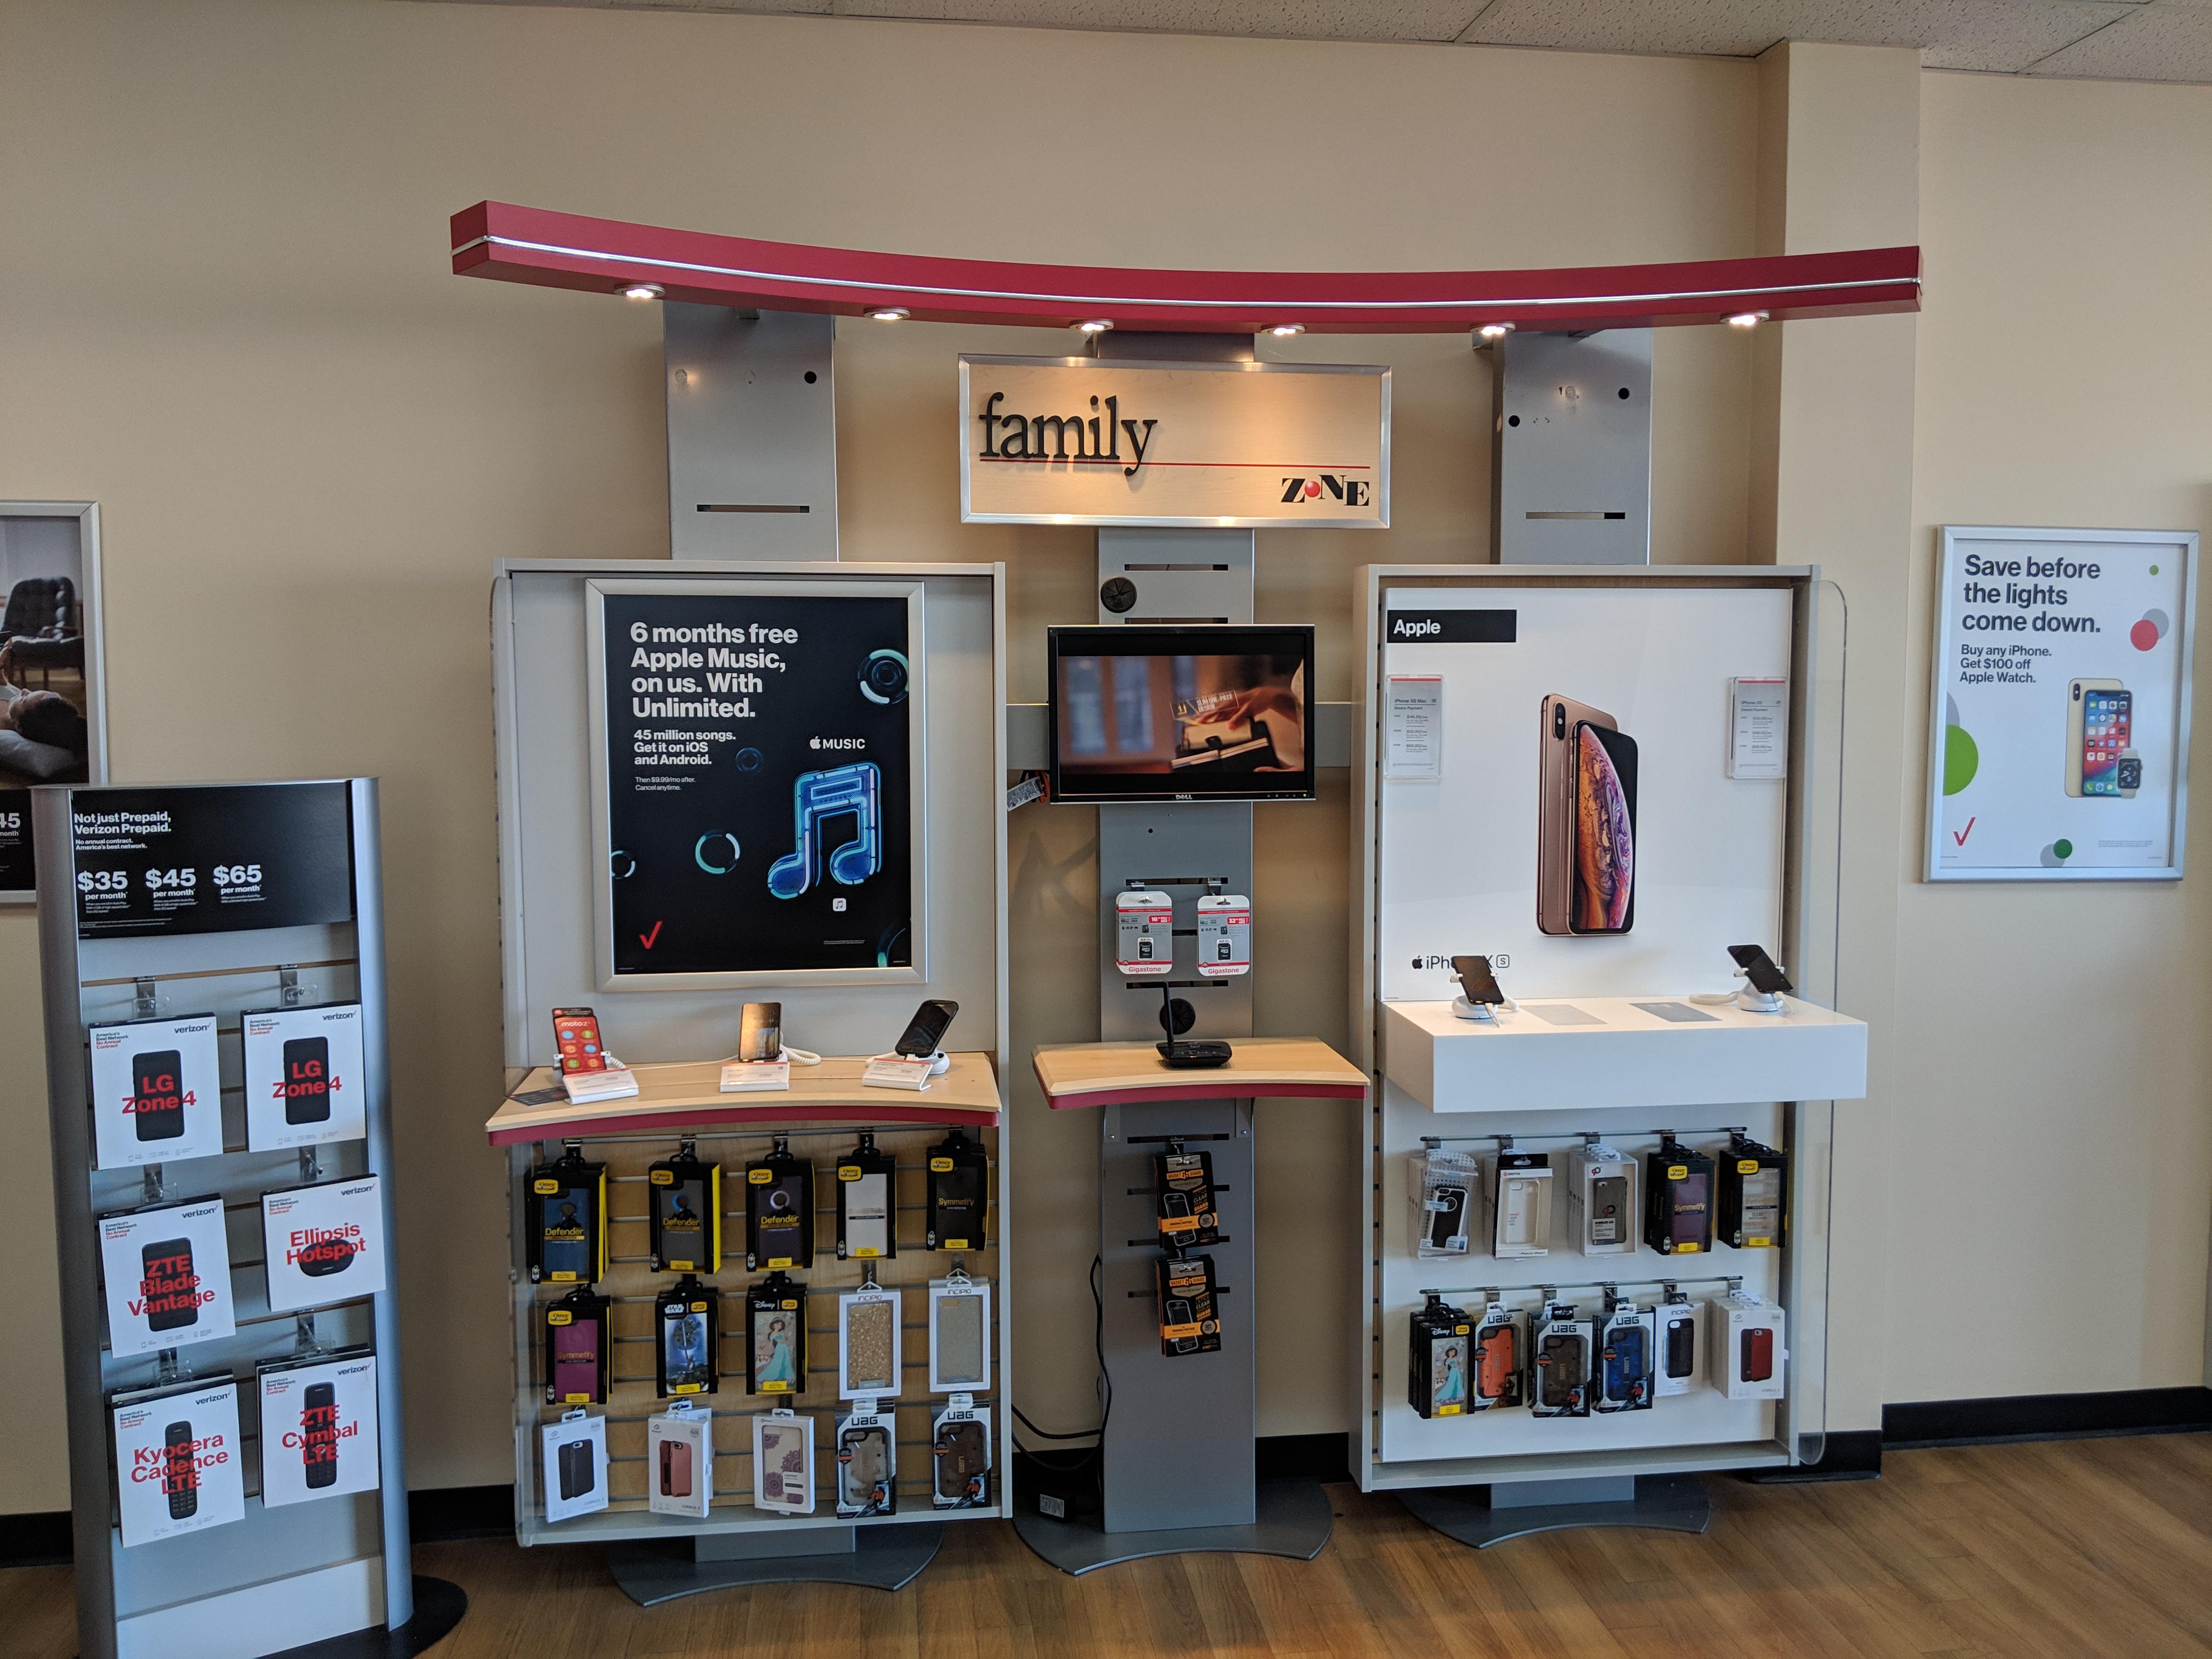 Wireless ZoneÂ® of Raymond invites you to come see our new look and learn about all our wireless offers!